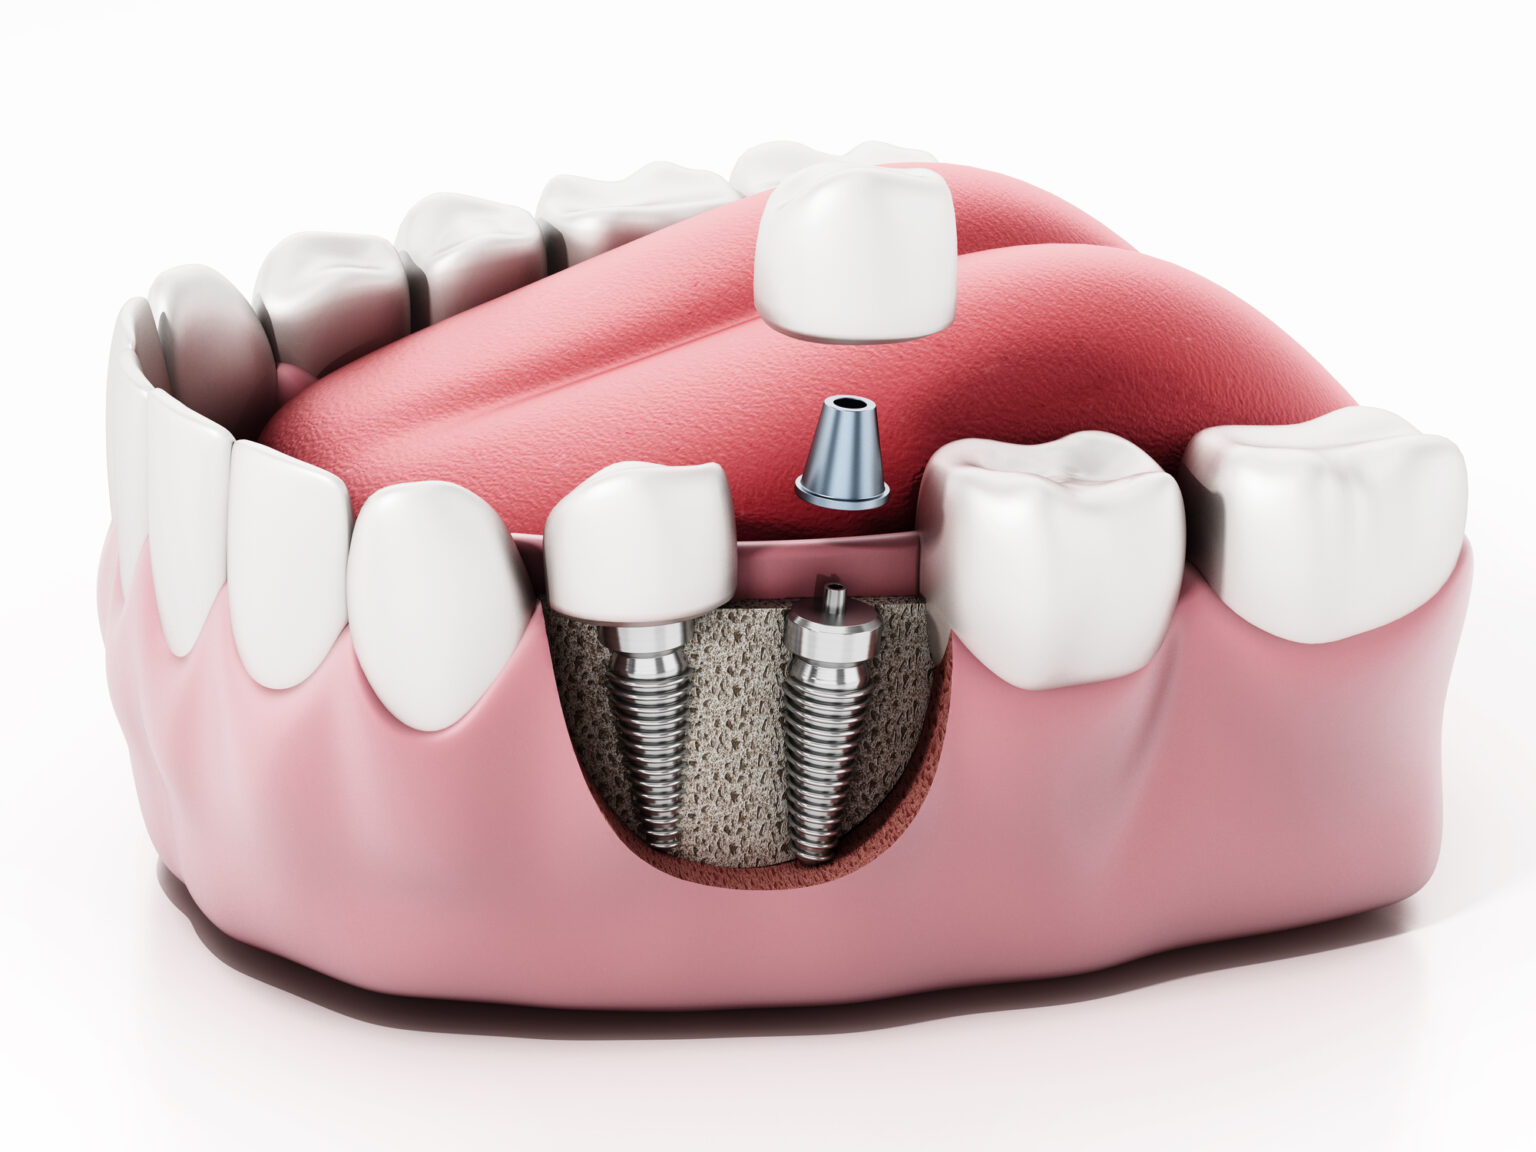 3d illustration of a dental implant in a jawbone with an exposed view showing the screw, abutment, and crown by a Dallas dentist.